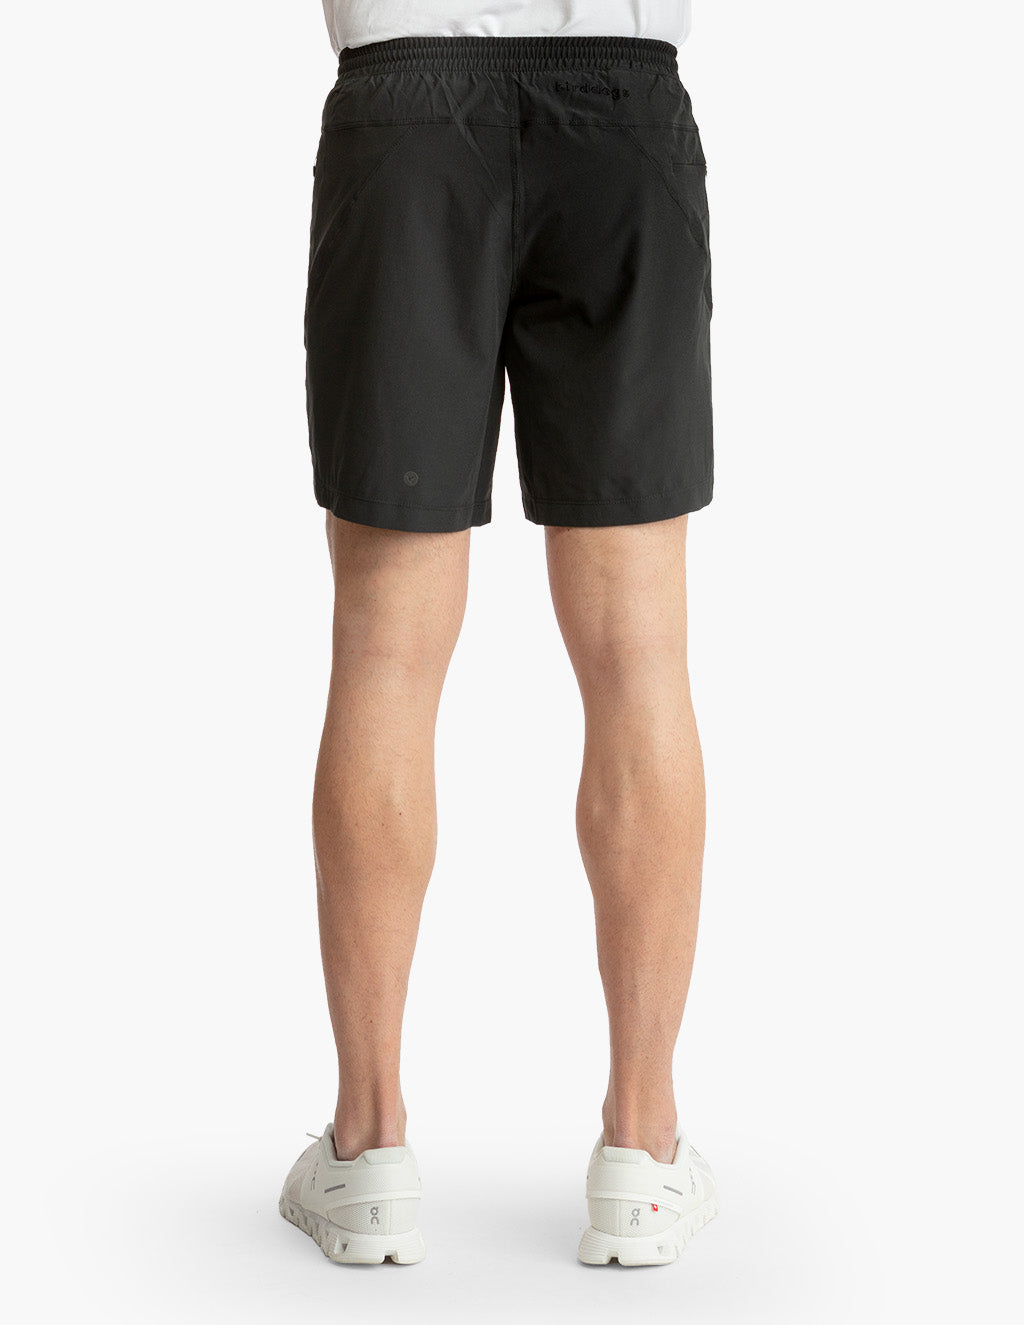 Oola Lingerie Control Cycling Shorts, Latte at John Lewis & Partners